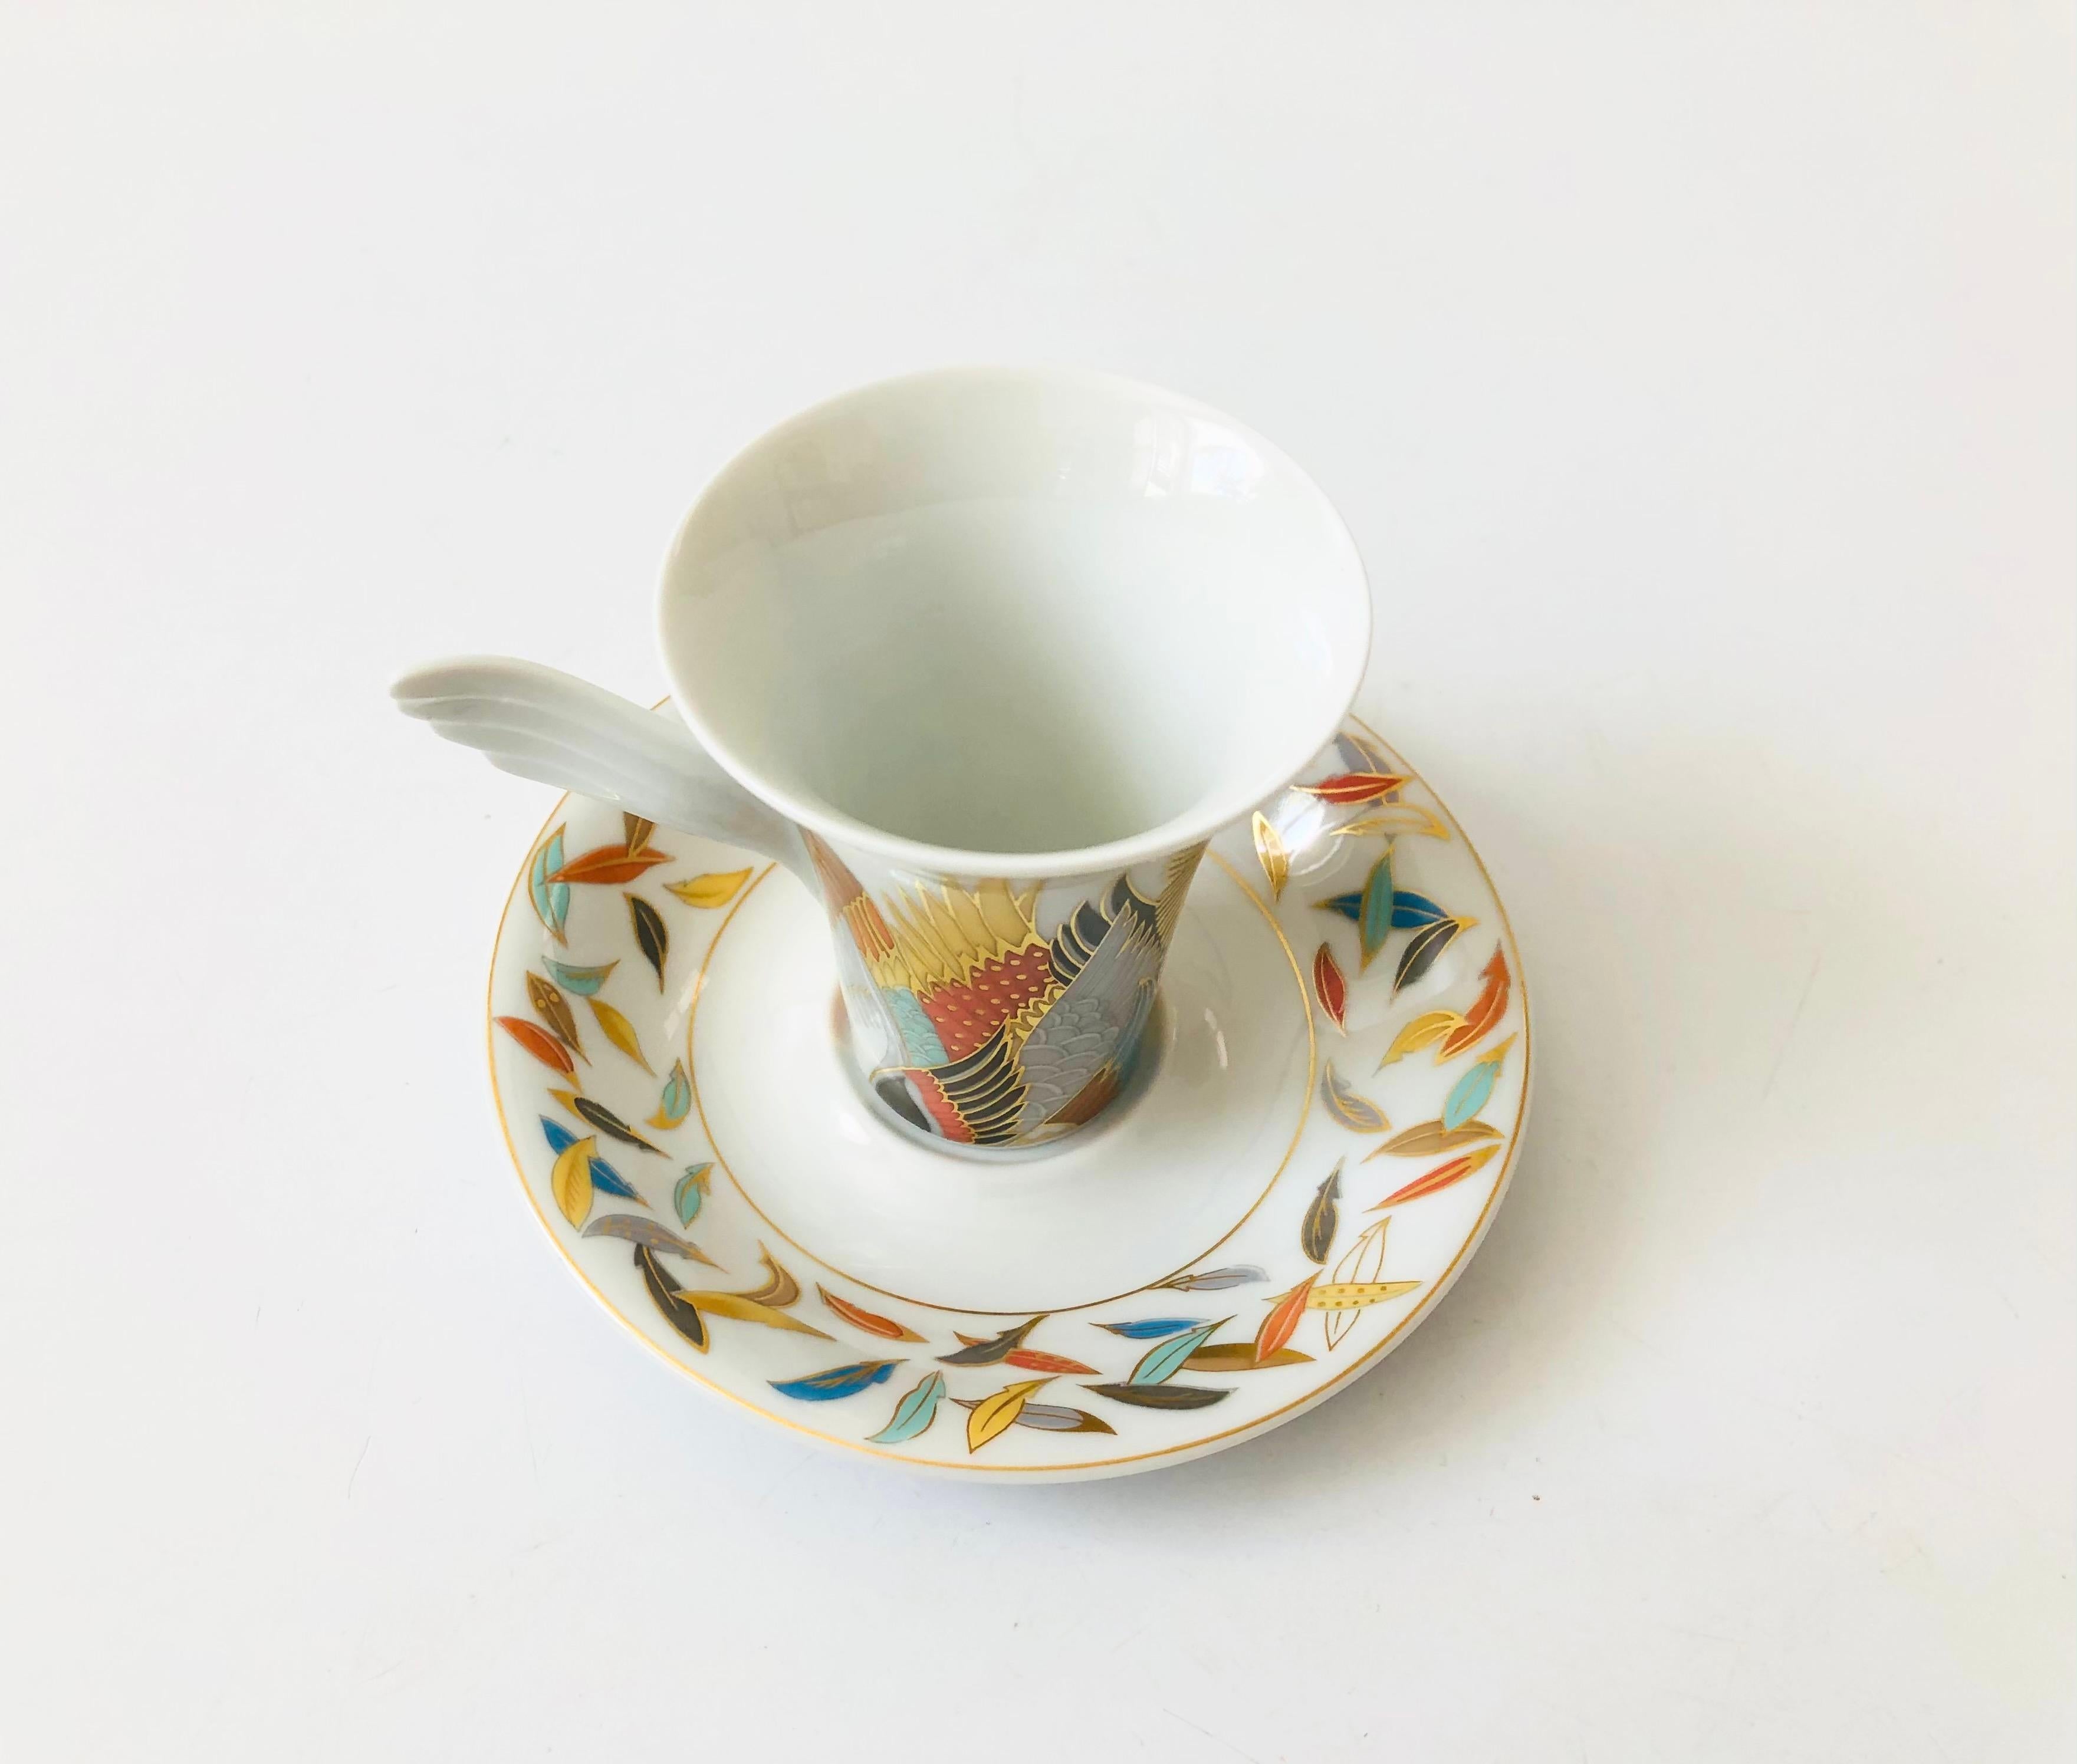 A vintage collectible porcelain espresso mug and saucer set from the Mythos line by Rosenthal, Germany. Signed by the designer, Jane Osborn Smith, and numbered NR 6. Features an intricate matching design on the cup and saucer with a winged handle.